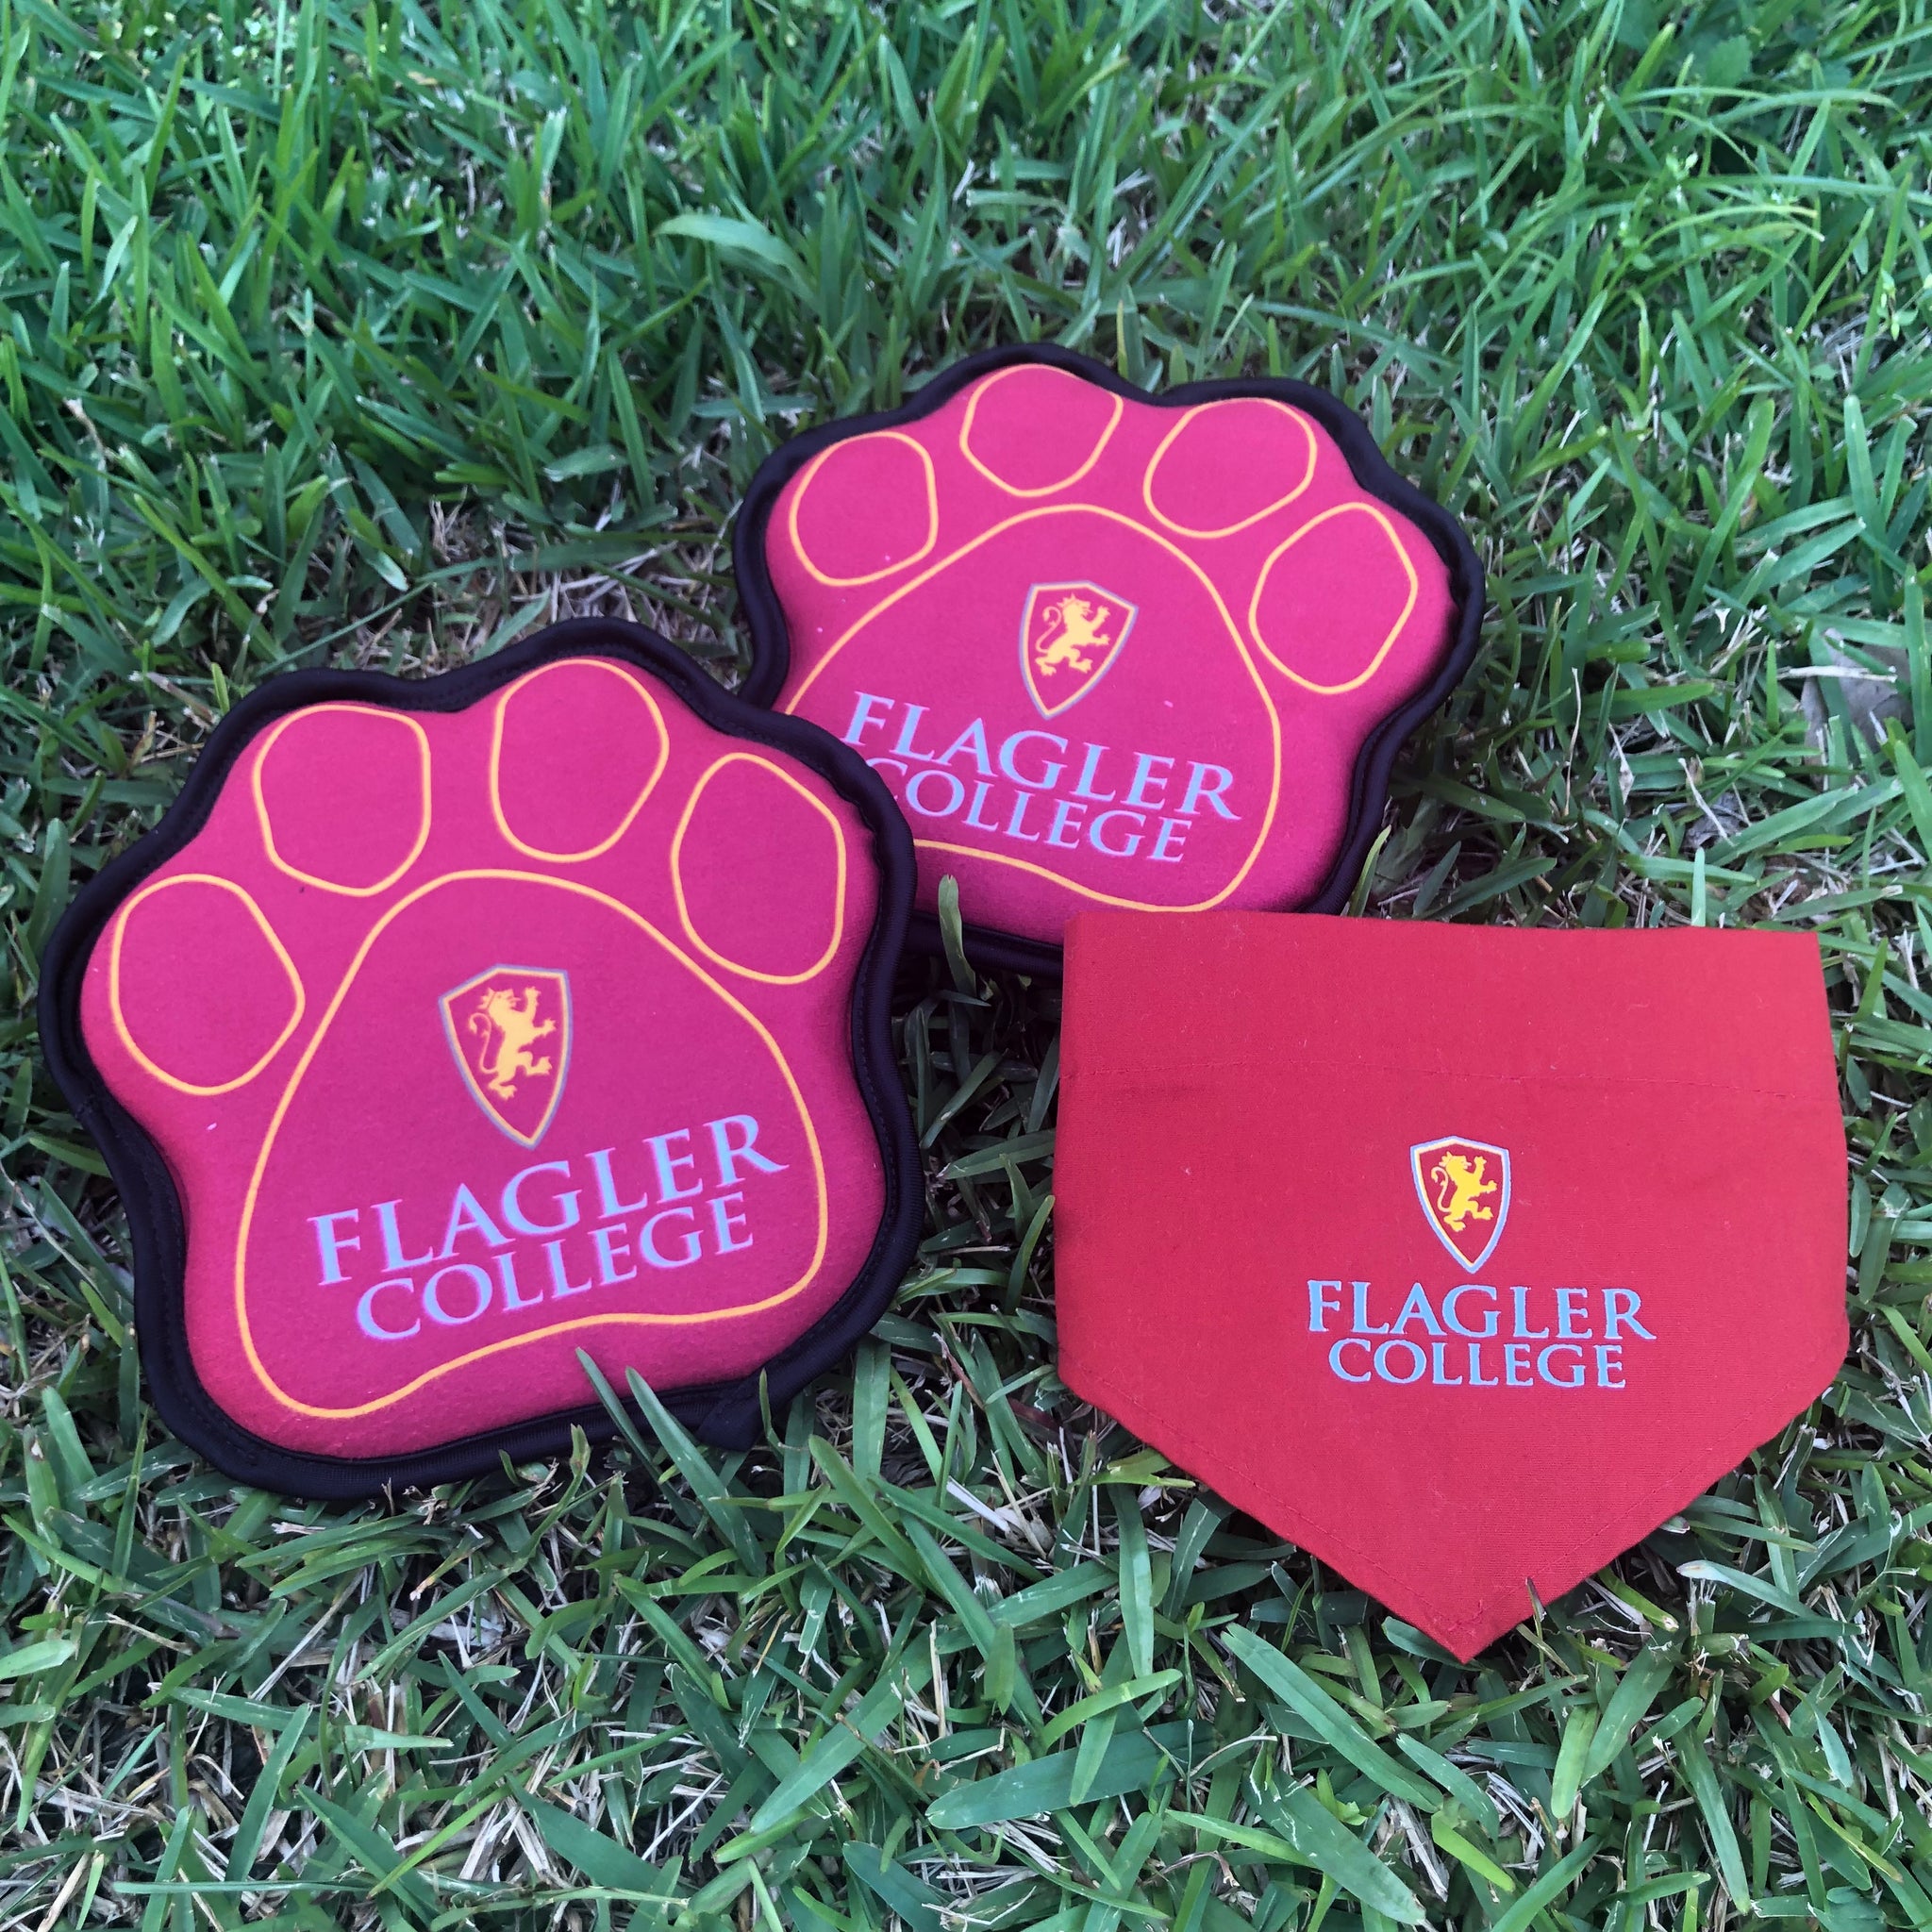 red and gold dog paw toy with Flagler college printed in white and shield printed in gold and red